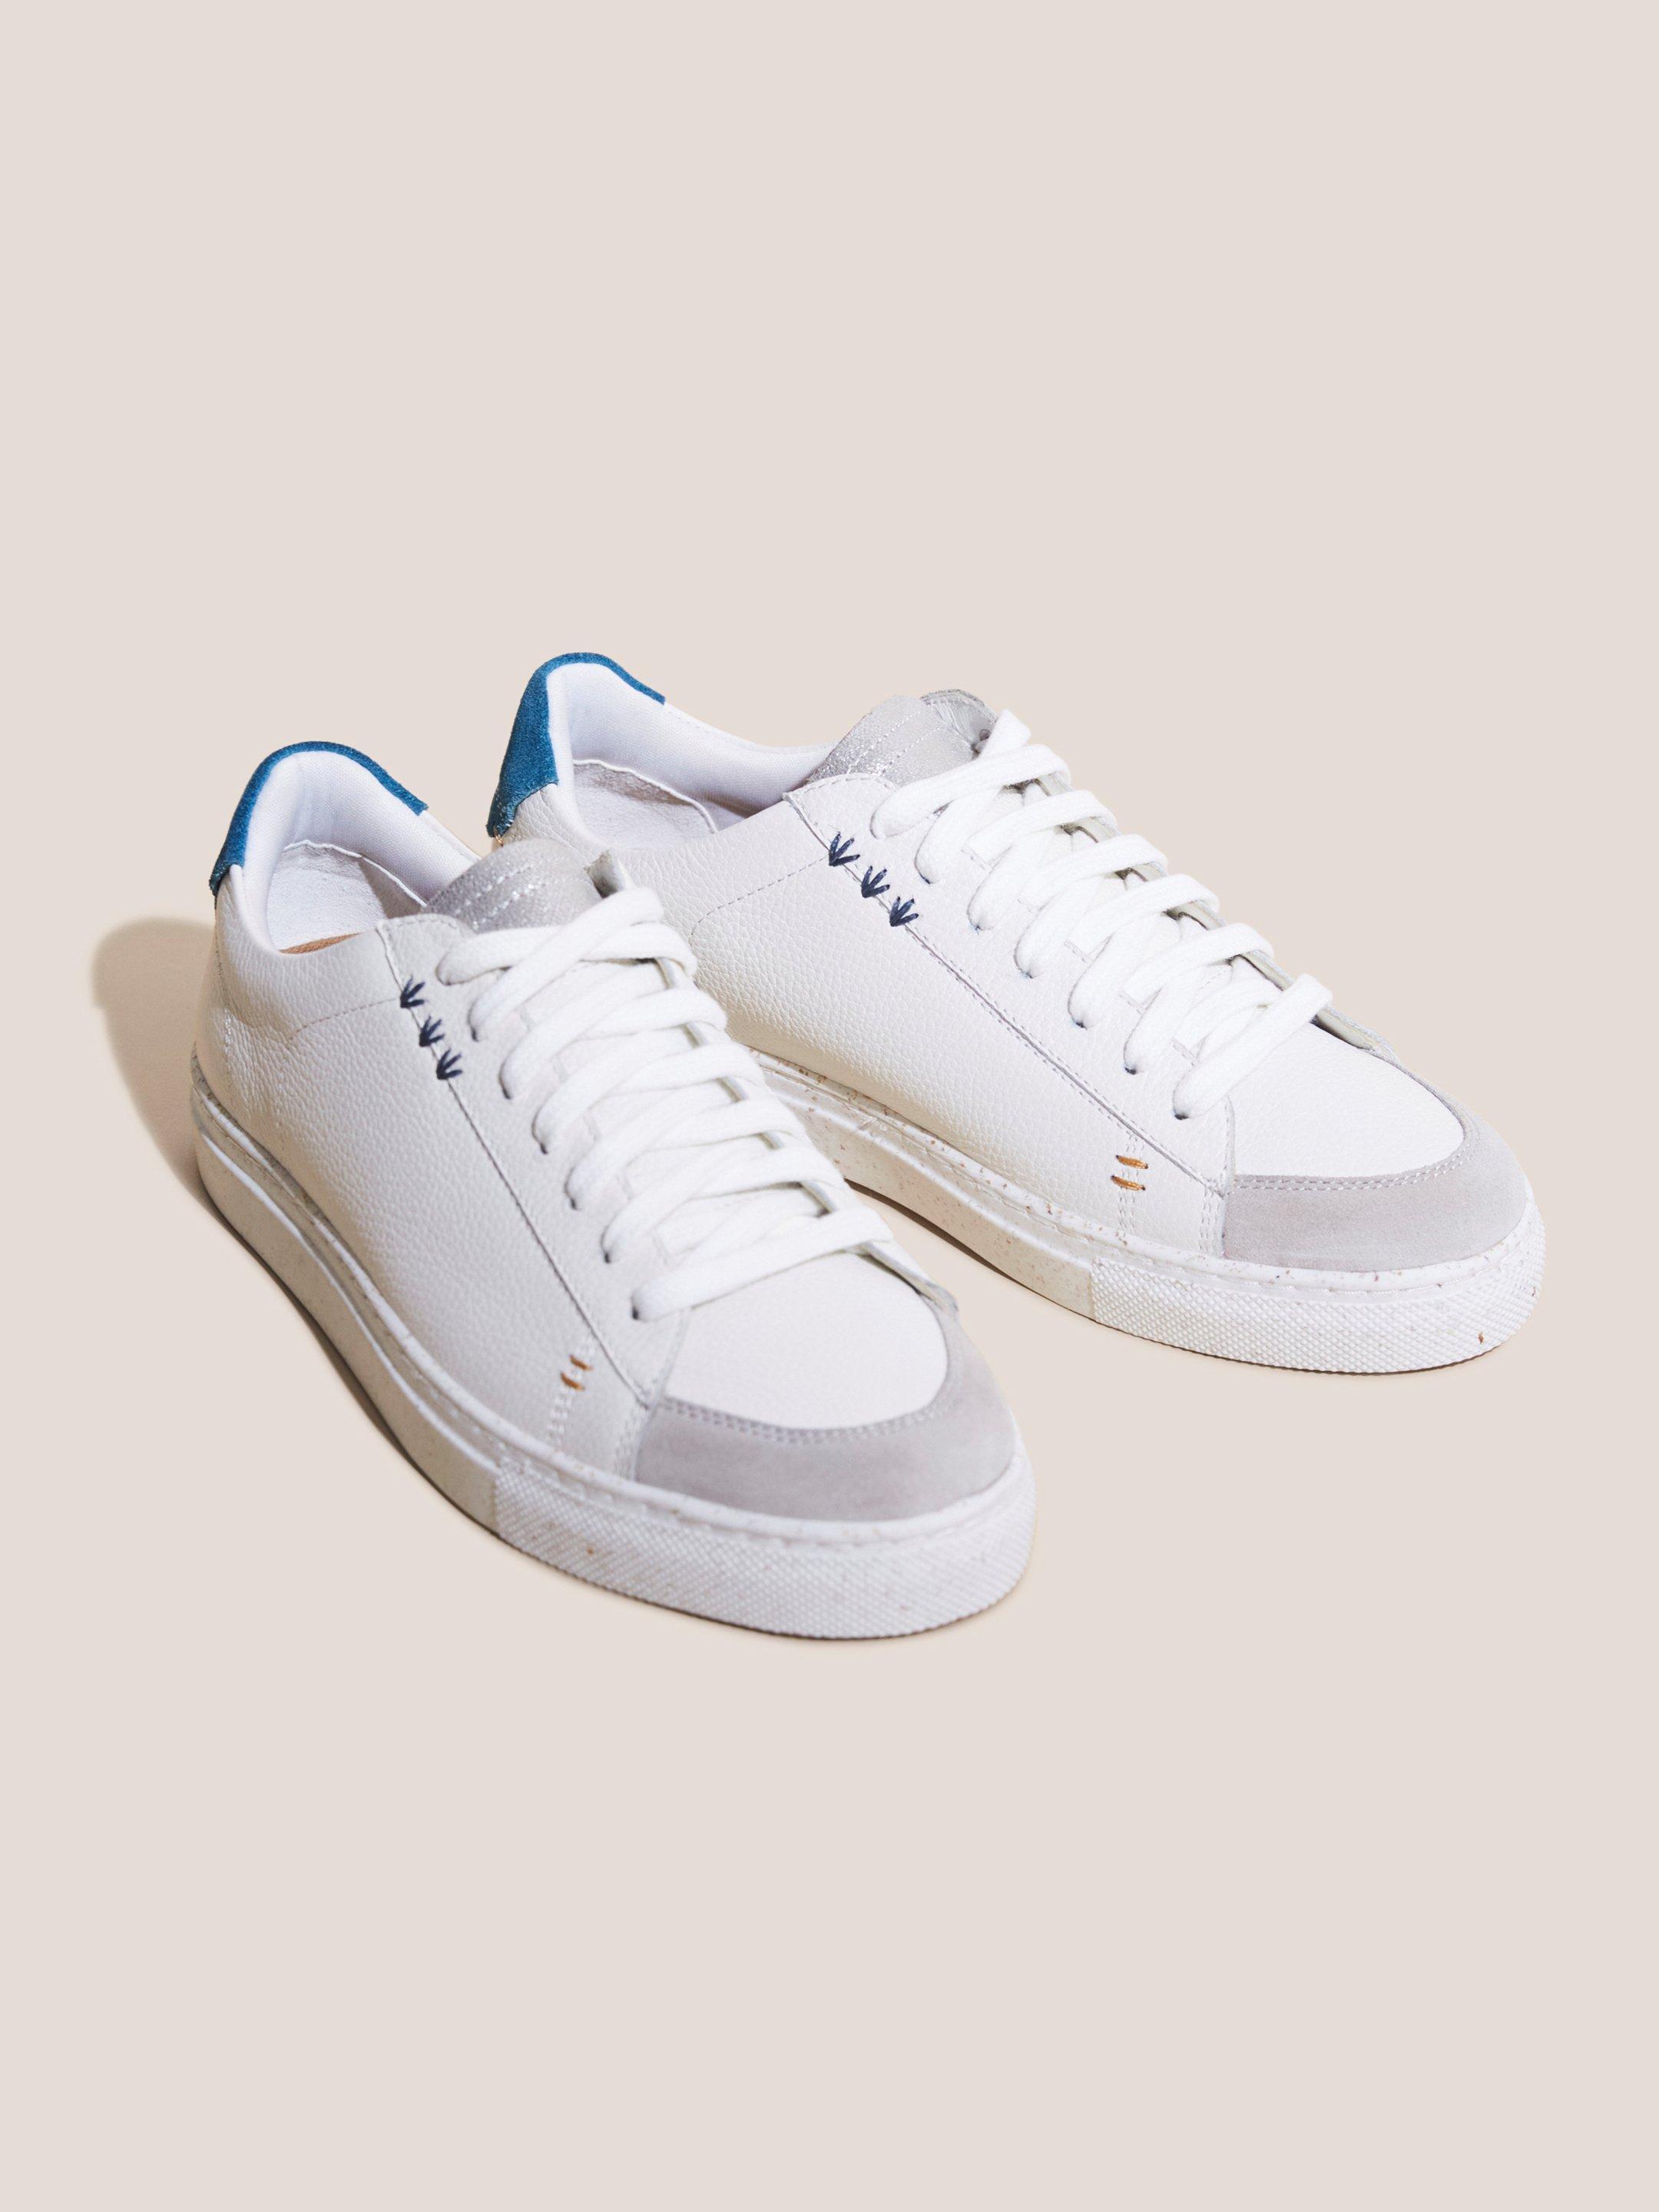 Toni Leather Trainer in WHITE MLT - FLAT FRONT